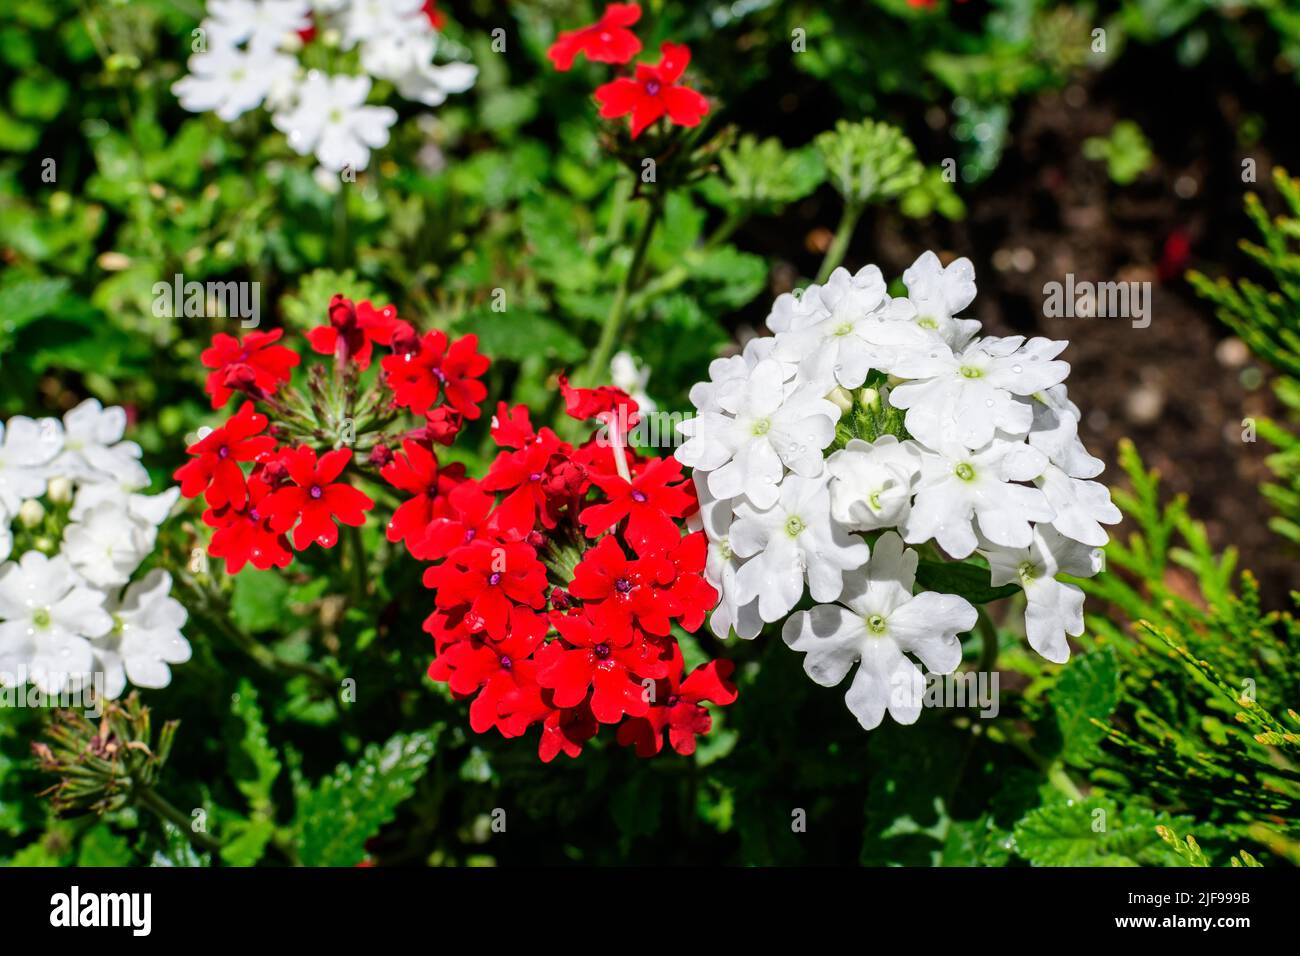 Many delicate fresh red and white flowers of Verbena Hybrida Nana Compacta plant, in a sunny summer garden, top view of beautiful outdoor floral backg Stock Photo